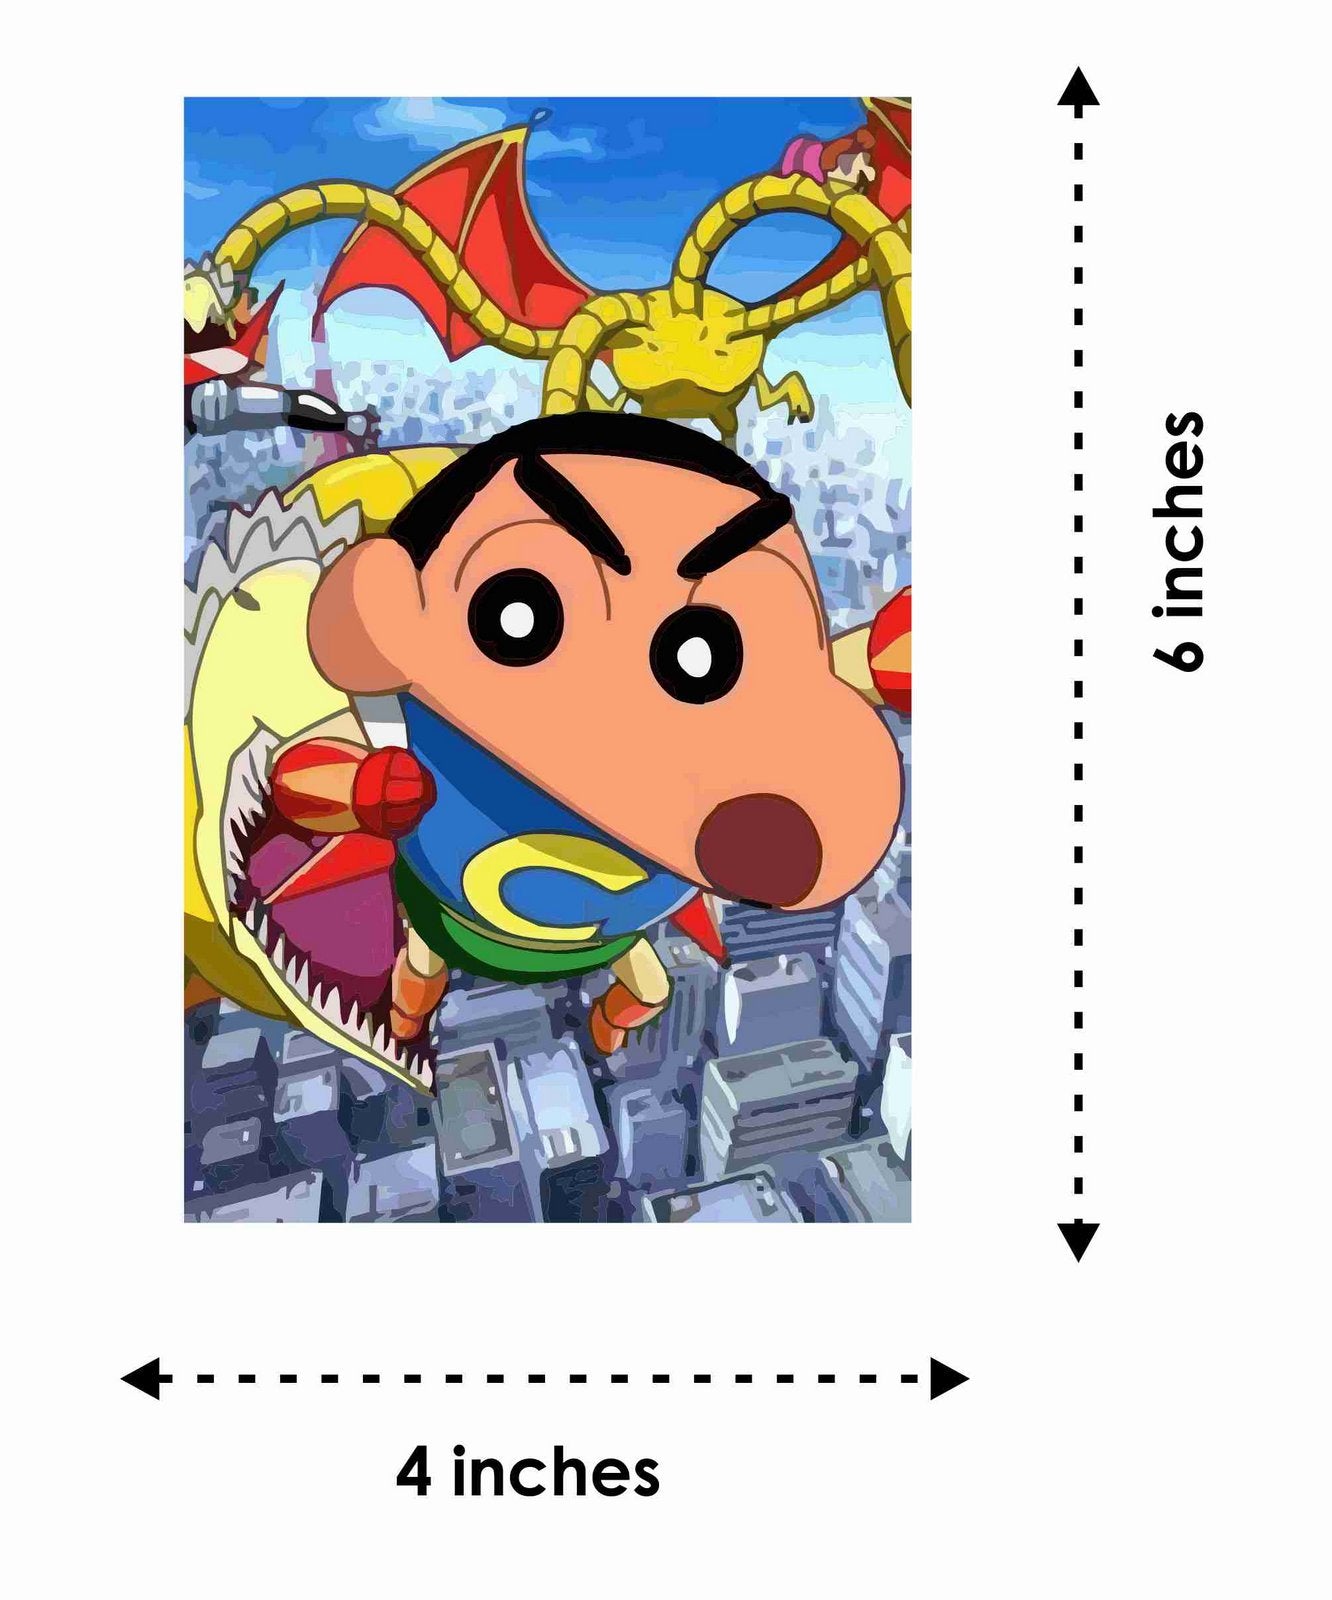 Shinchan Theme Children's Birthday Party Invitations Cards with Envelopes - Kids Birthday Party Invitations for Boys or Girls,- Invitation Cards (Pack of 10)